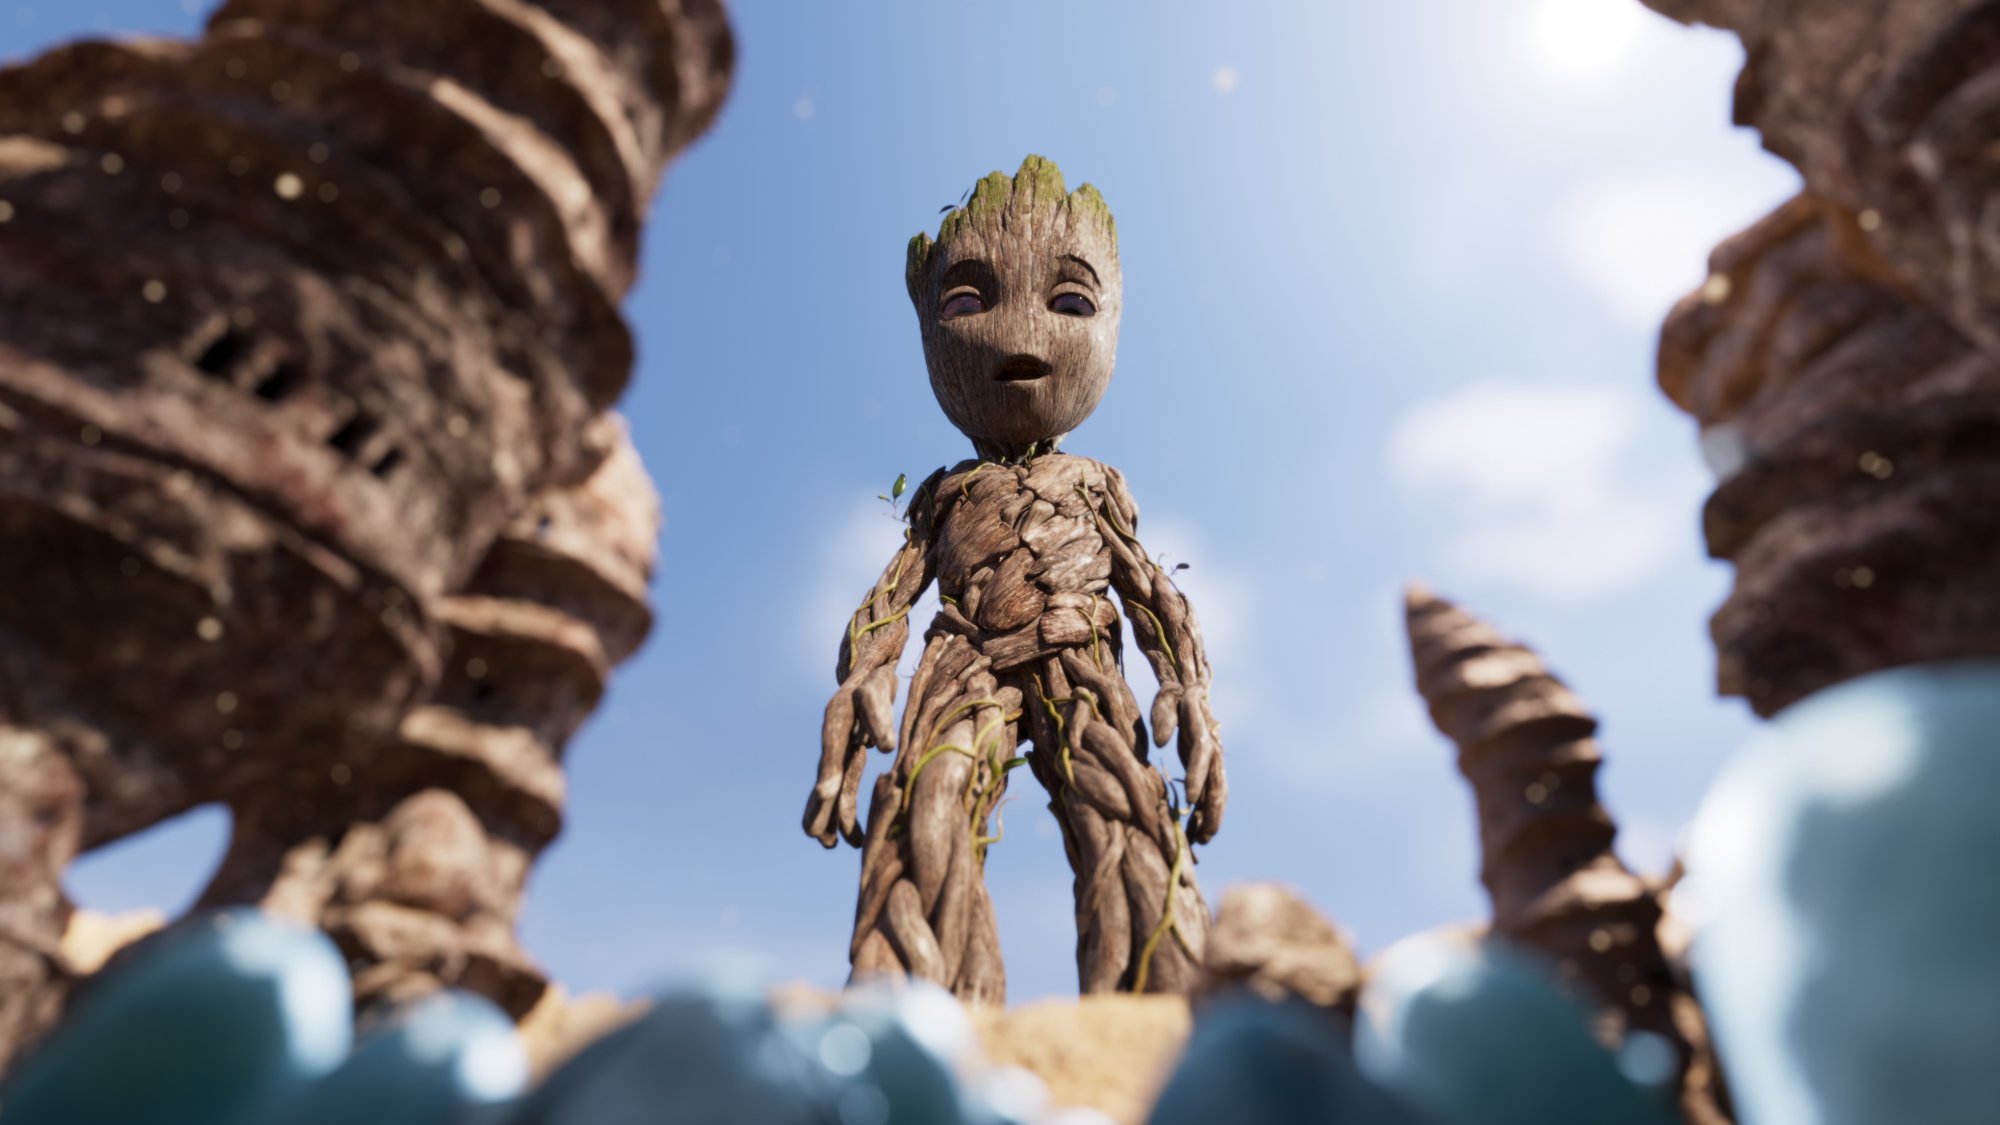 ‘I Am Groot’: Do the Marvel Shorts Tie Into the ‘Guardians of the Galaxy’ Movies?